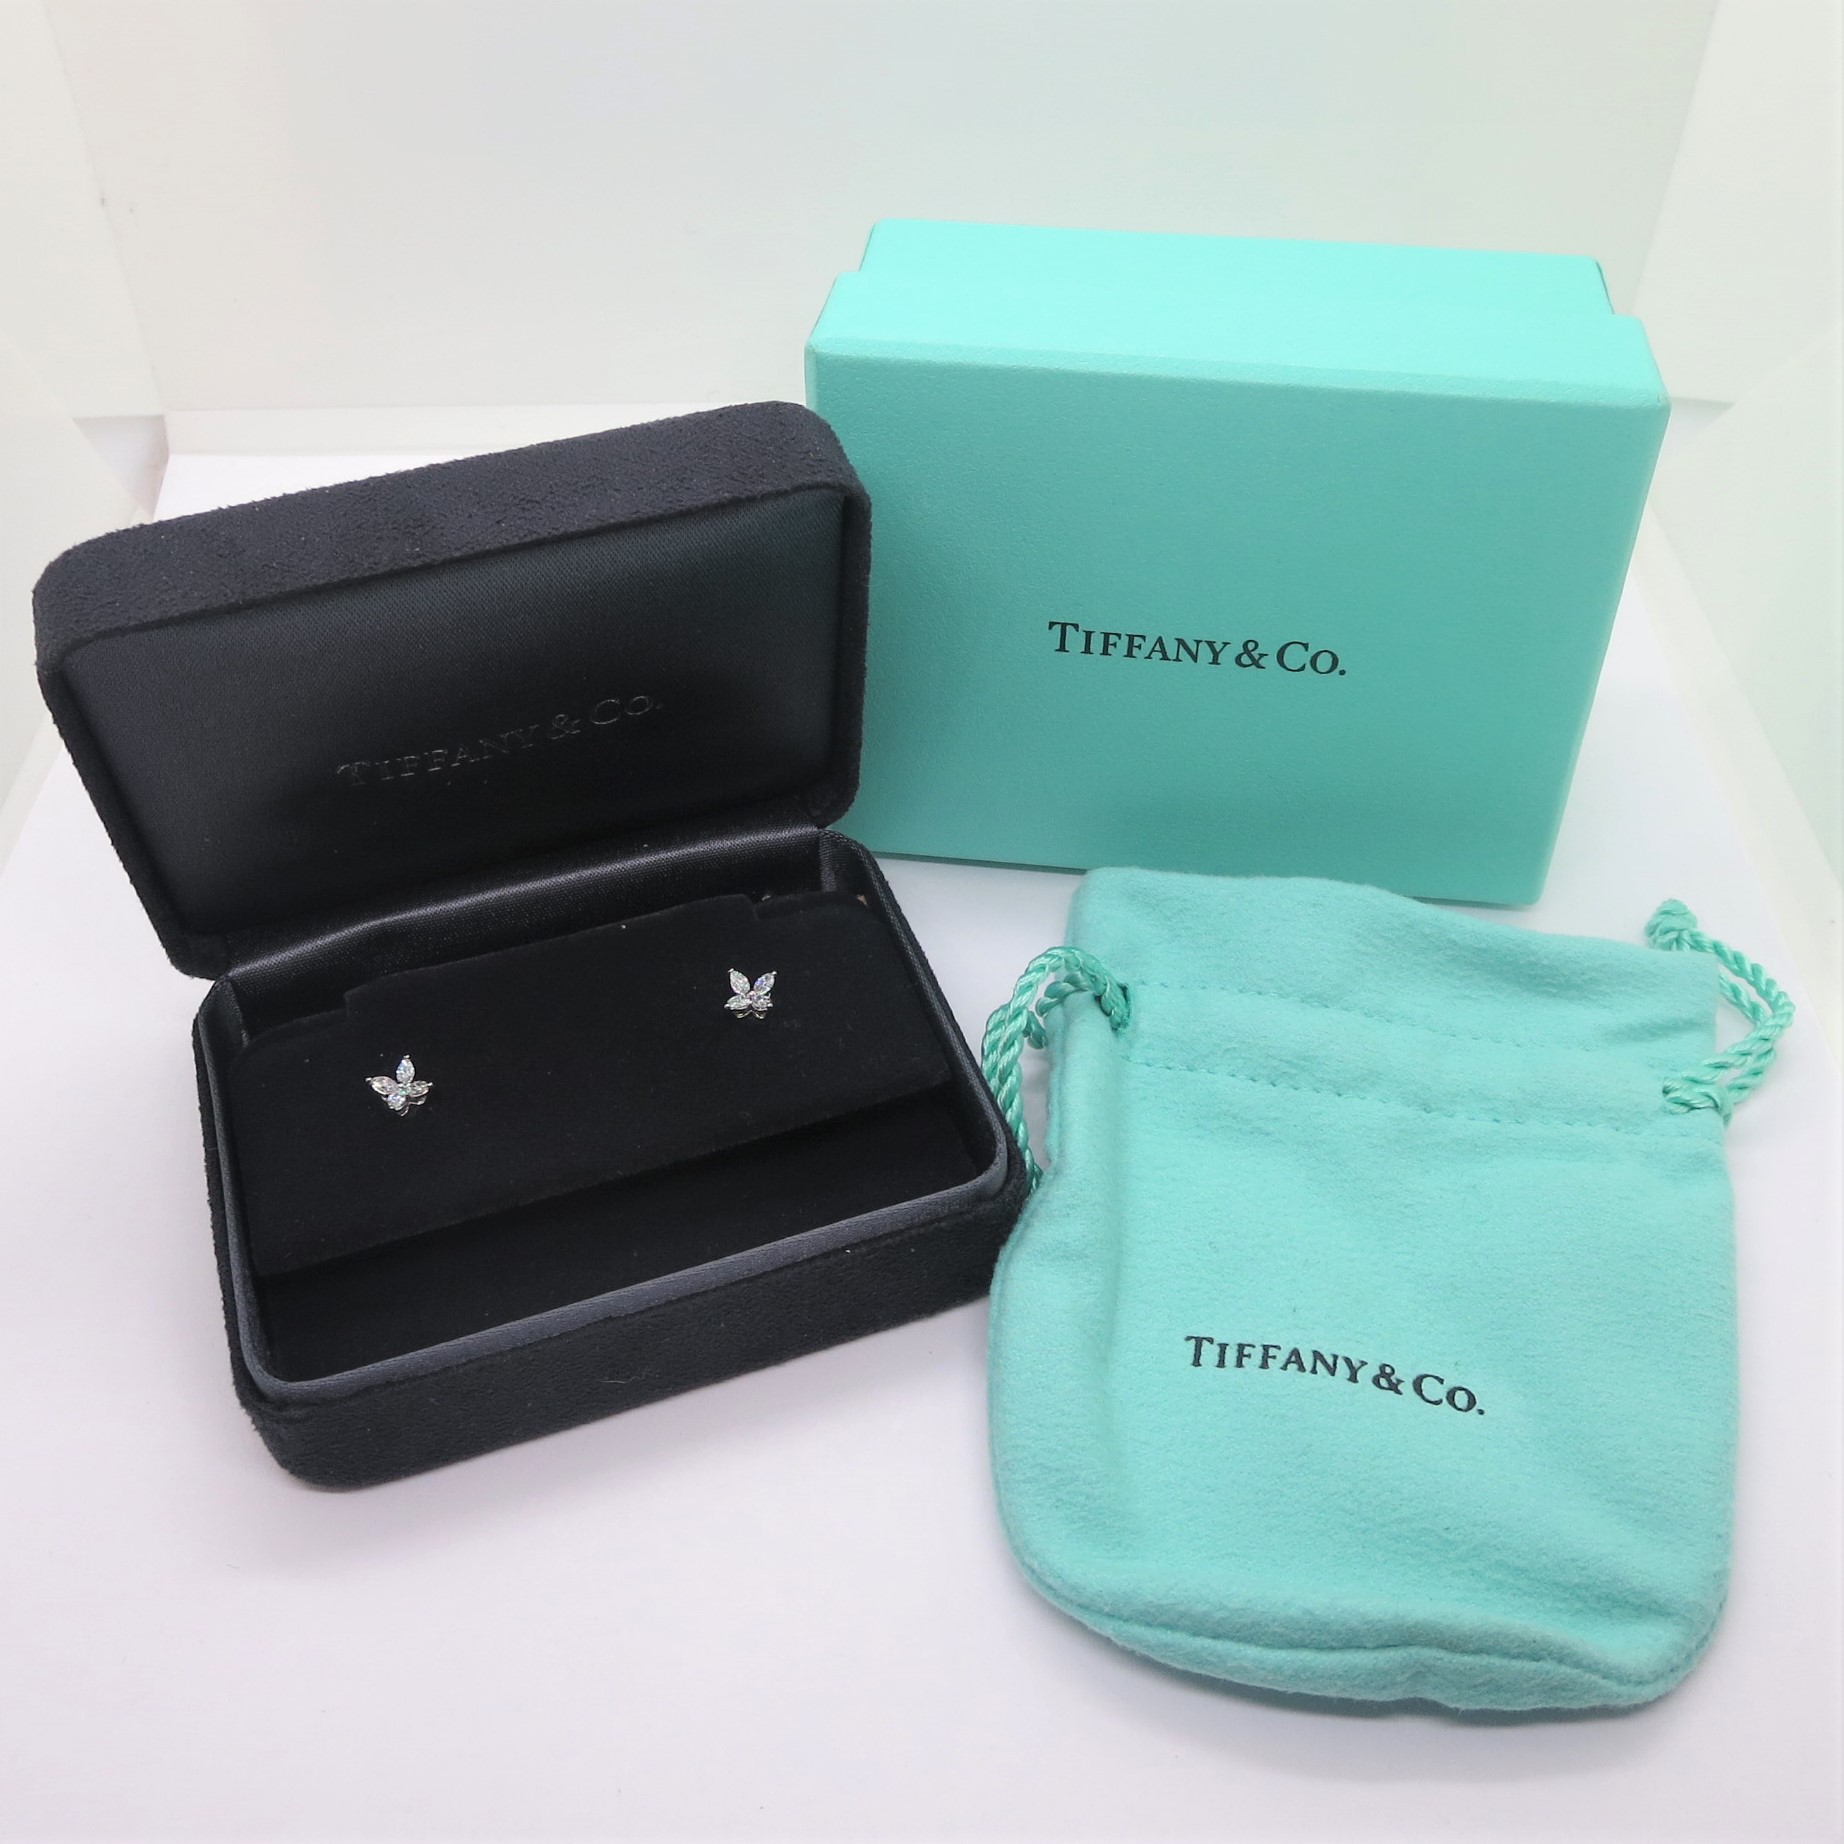 Authentic Tiffany & Co. Platinum .70 ctw Diamond Studs H VS1 and VS2 with Box and Papers